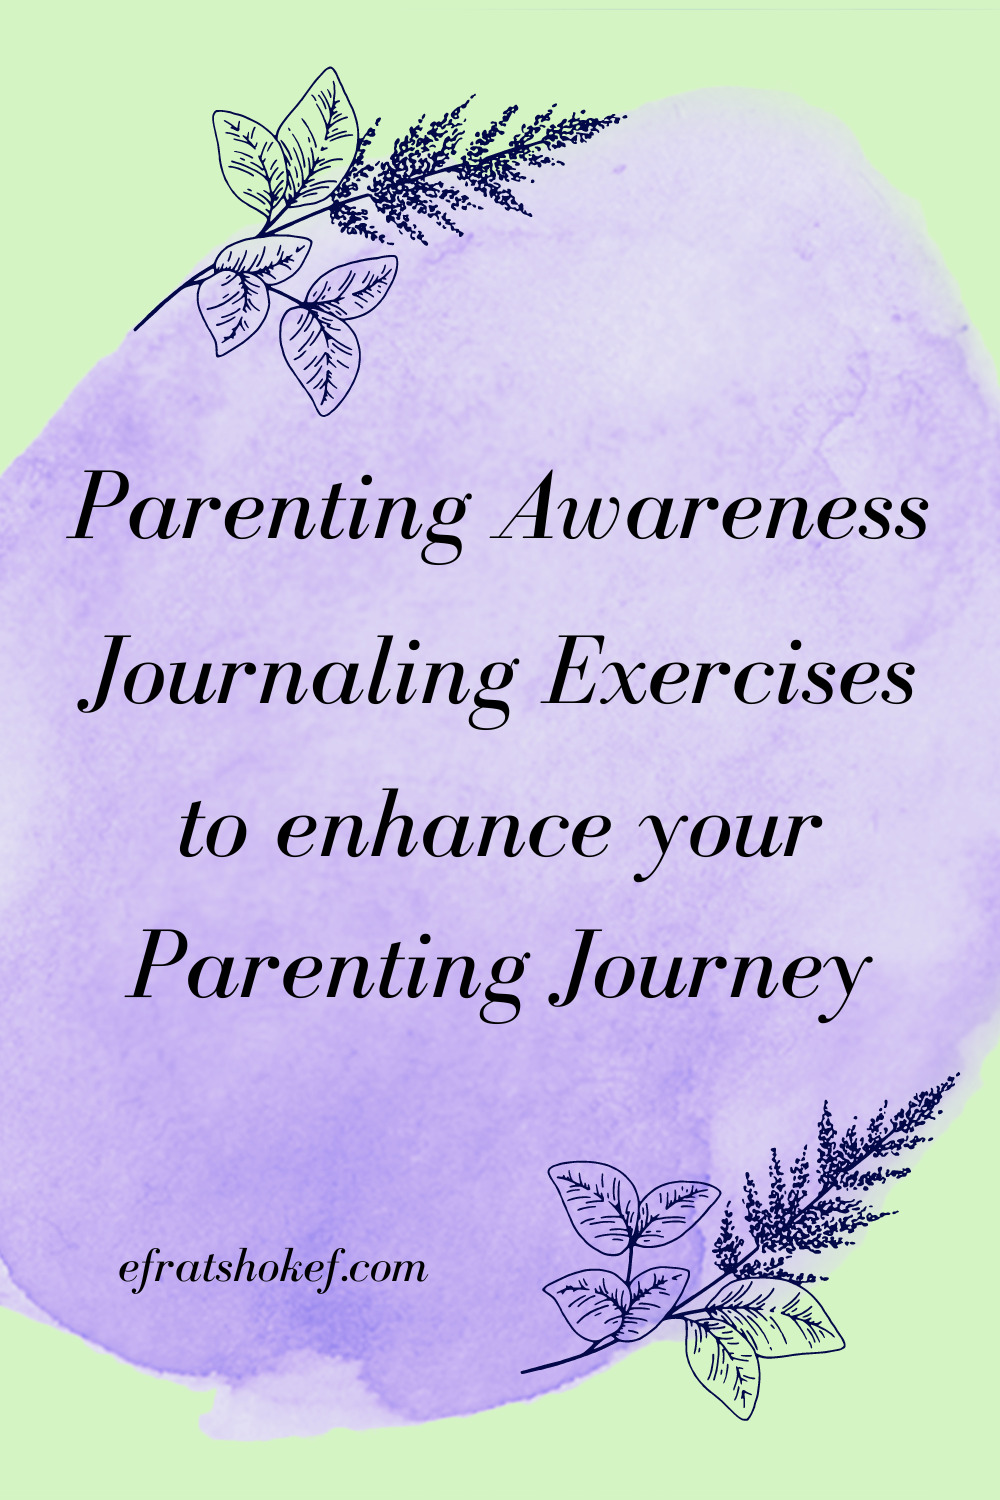 Parenting Awareness Journaling Exercises to enhance your Parenting Journey